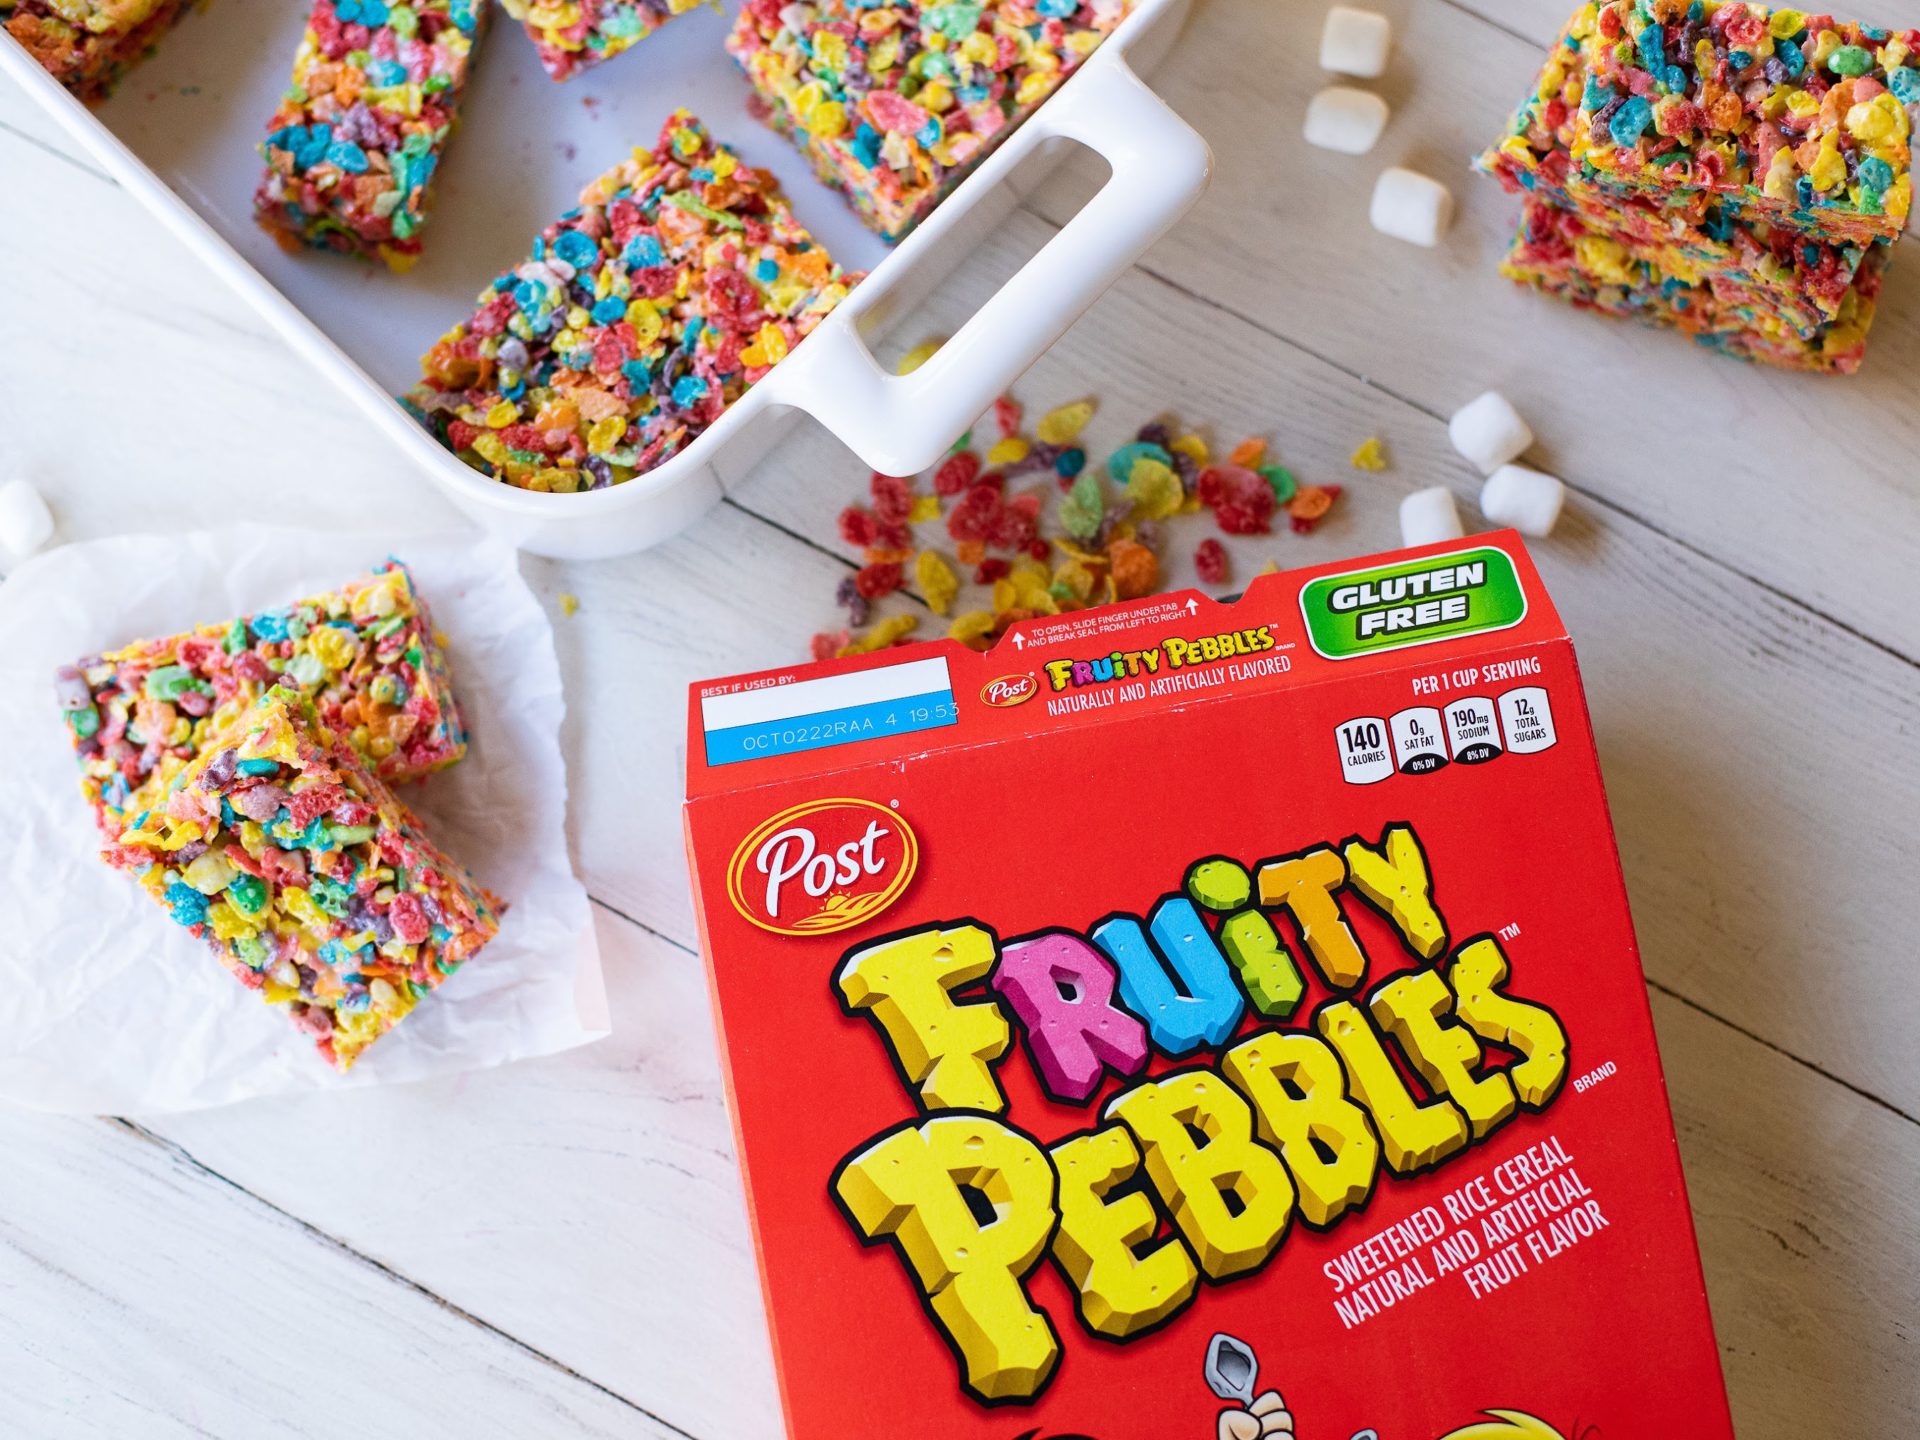 Get The Mega Size Boxes Of Post Pebbles Cereal For Just $3.99 At Kroger (Regular Price $6.99)